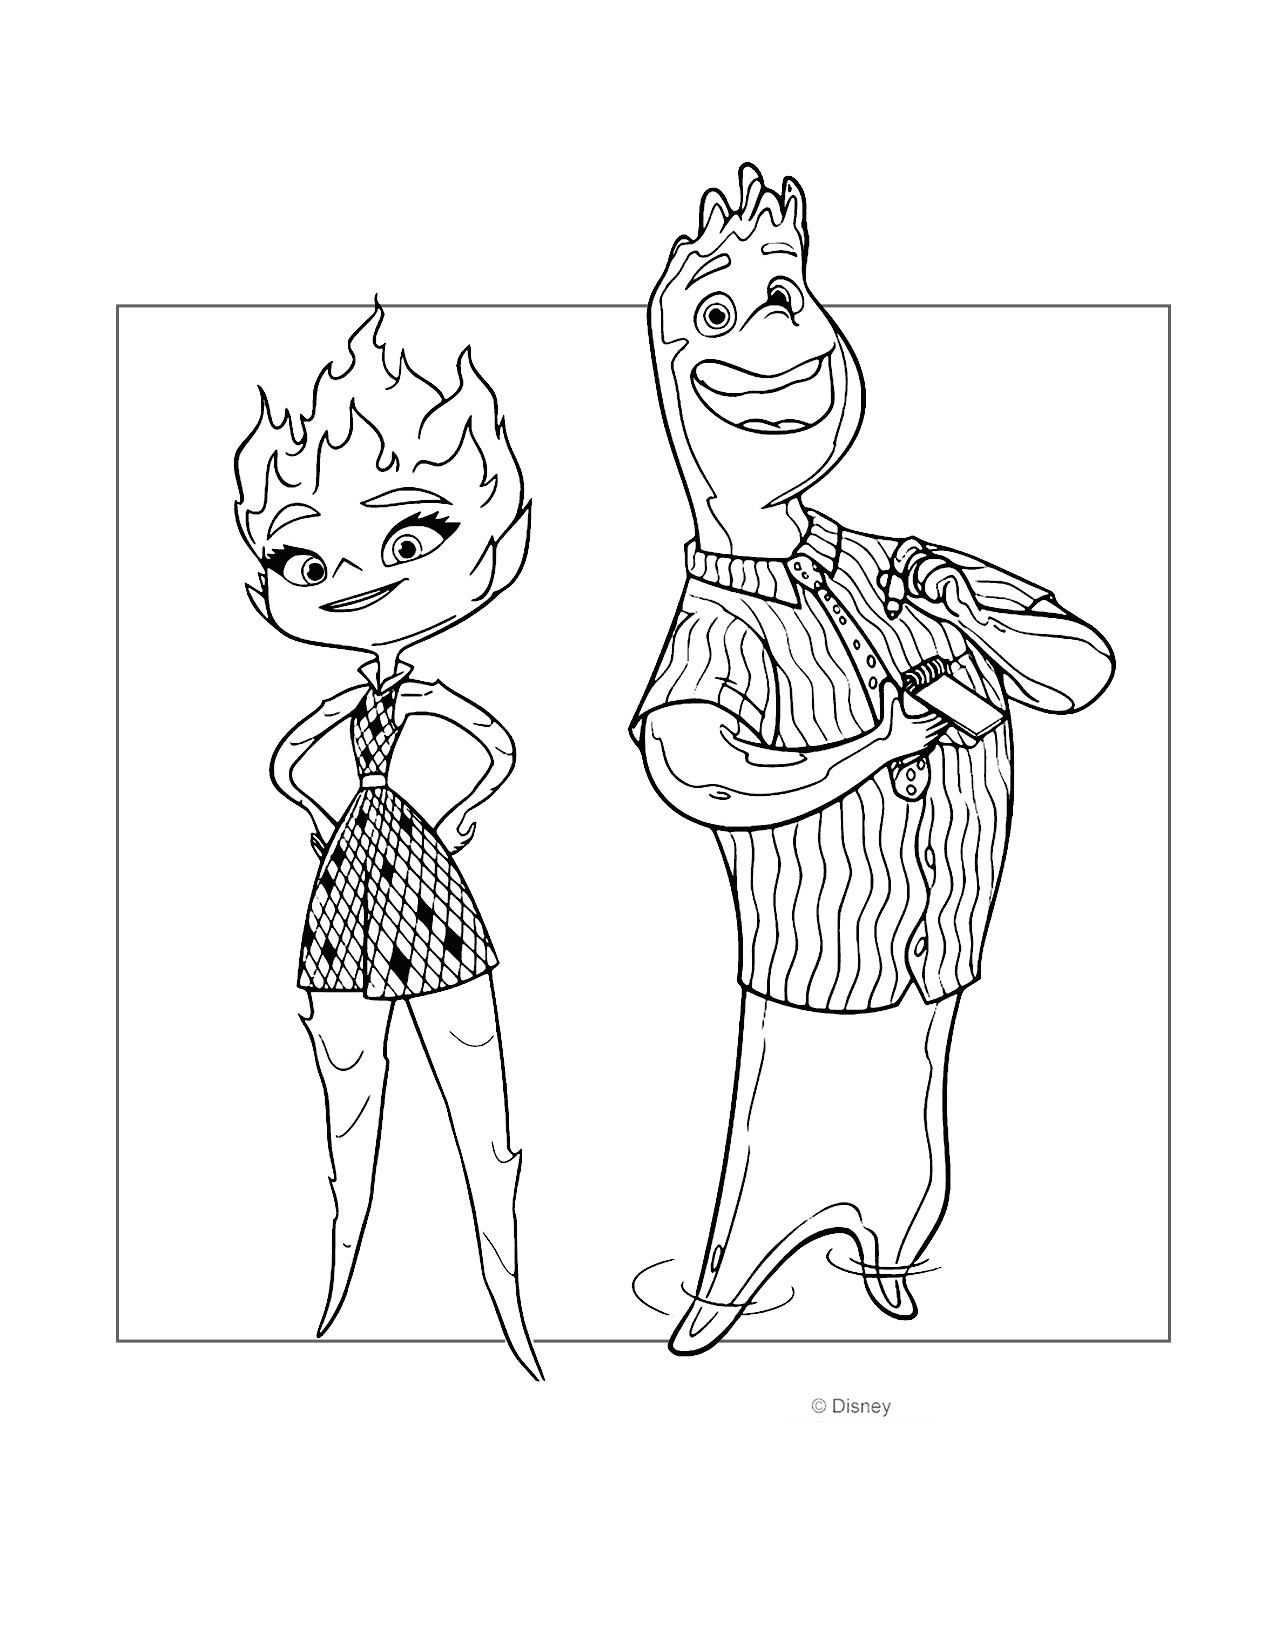 Elemental Ember And Wade Coloring Page